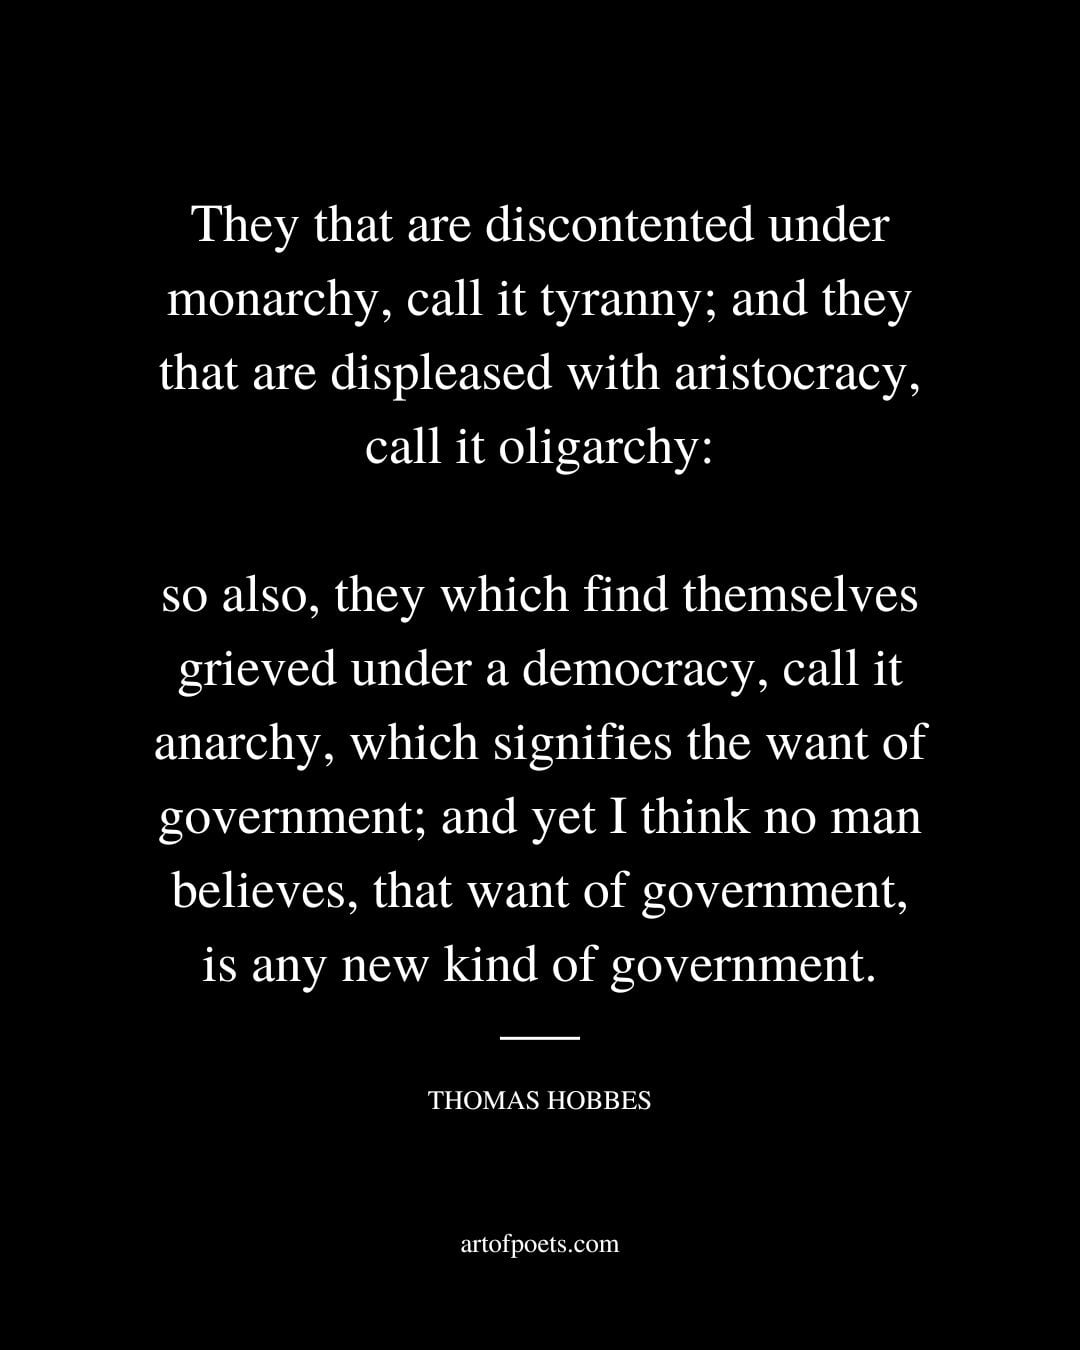 They that are discontented under monarchy call it tyranny and they that are displeased with aristocracy call it oligarchy